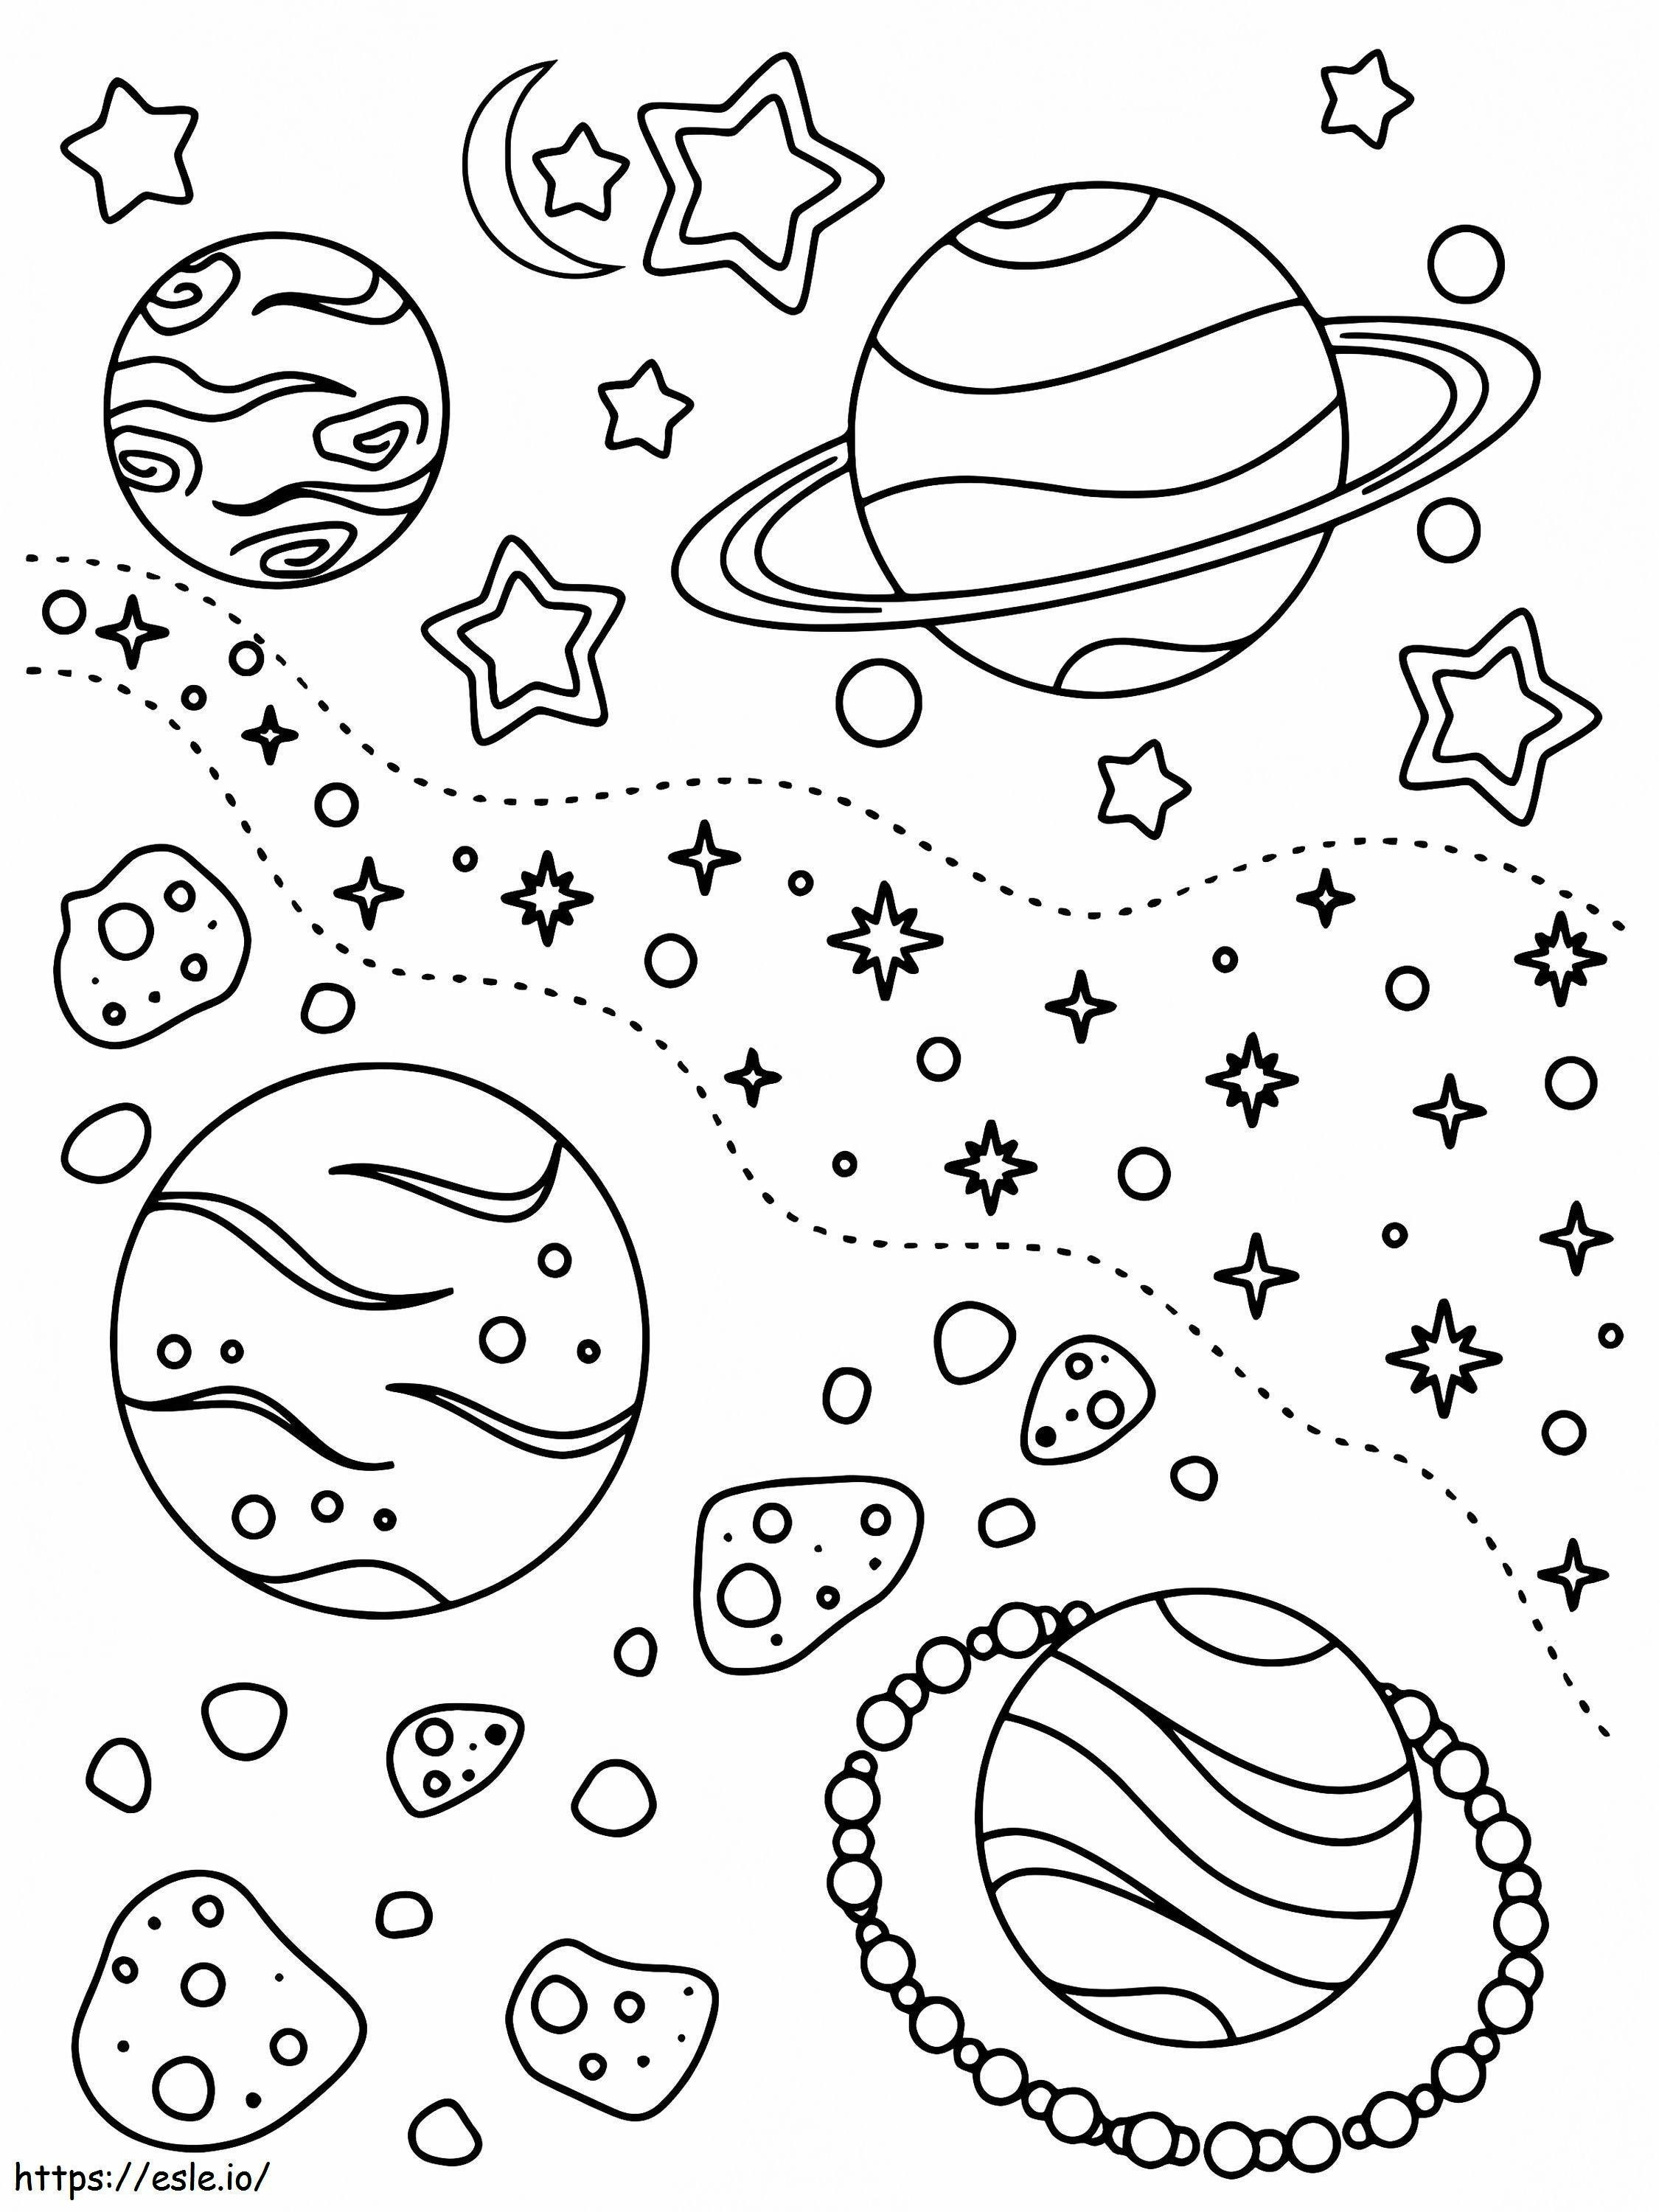 Elegant Planets In Space coloring page